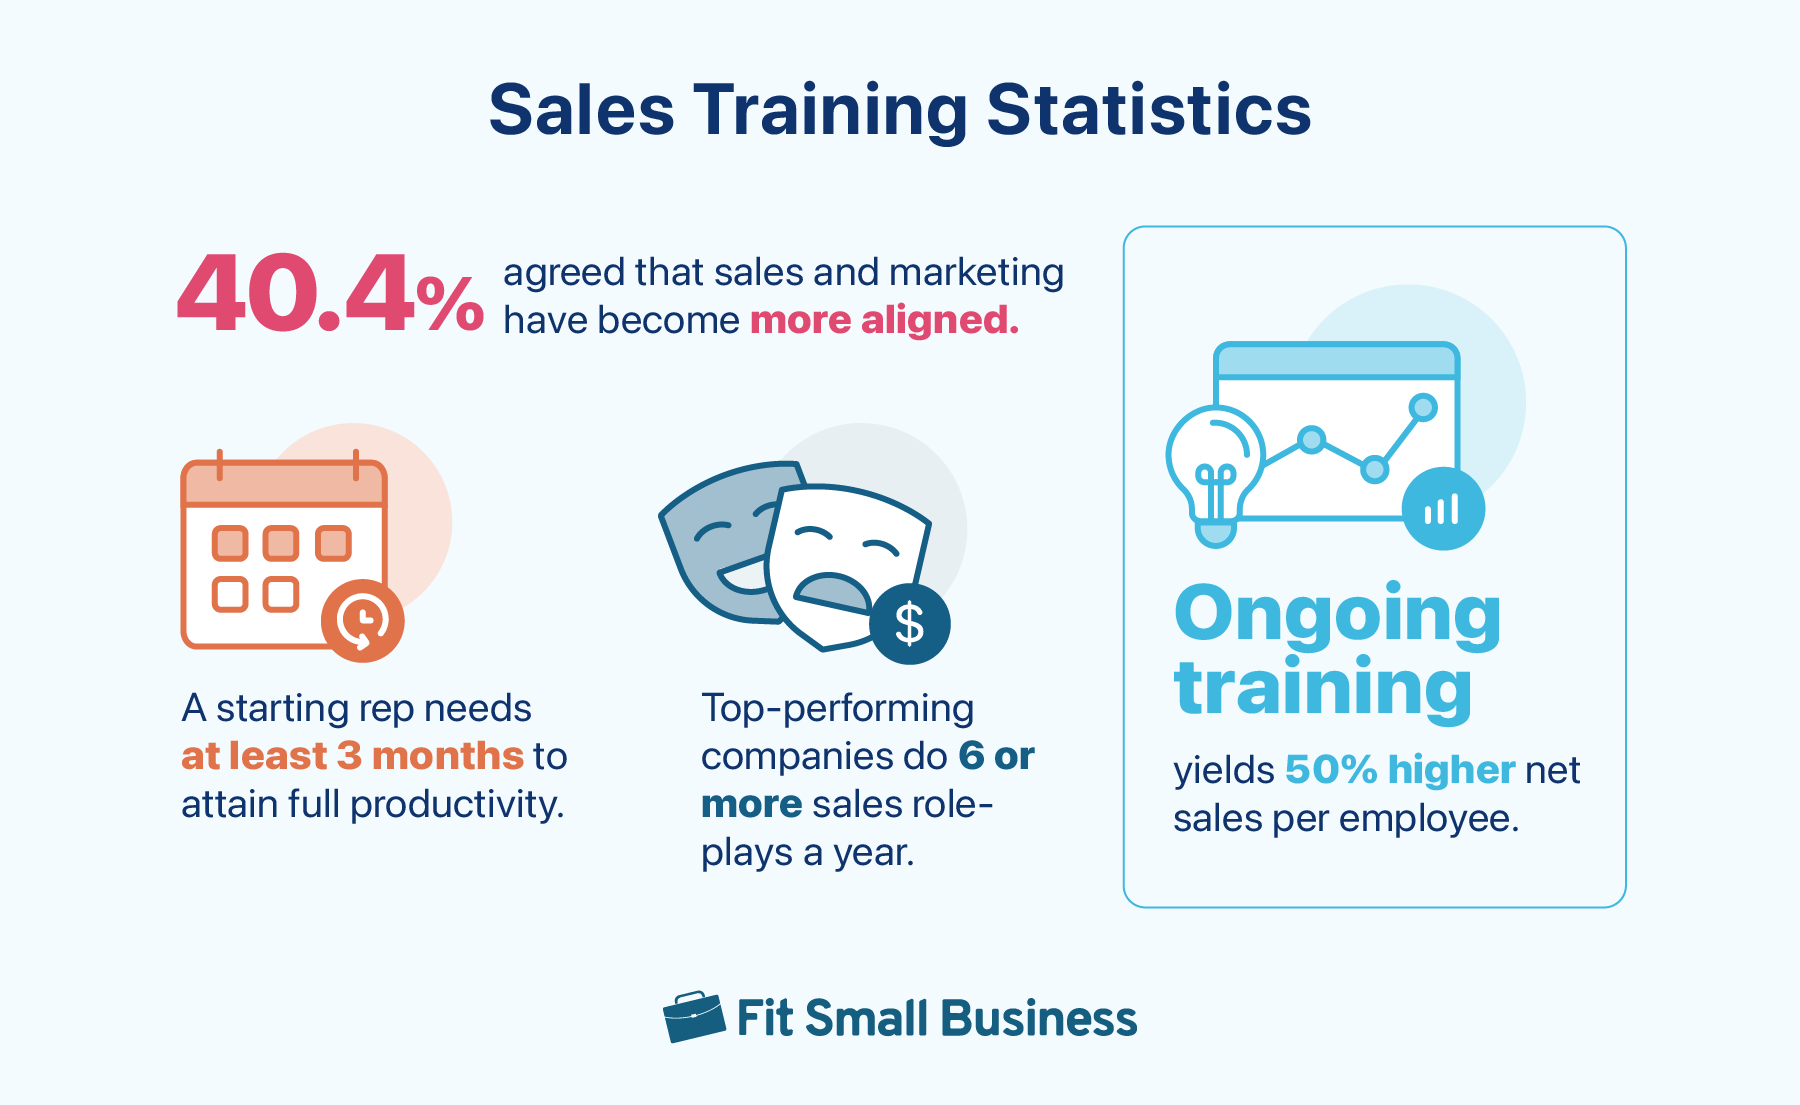 Graphic about sales training statistics